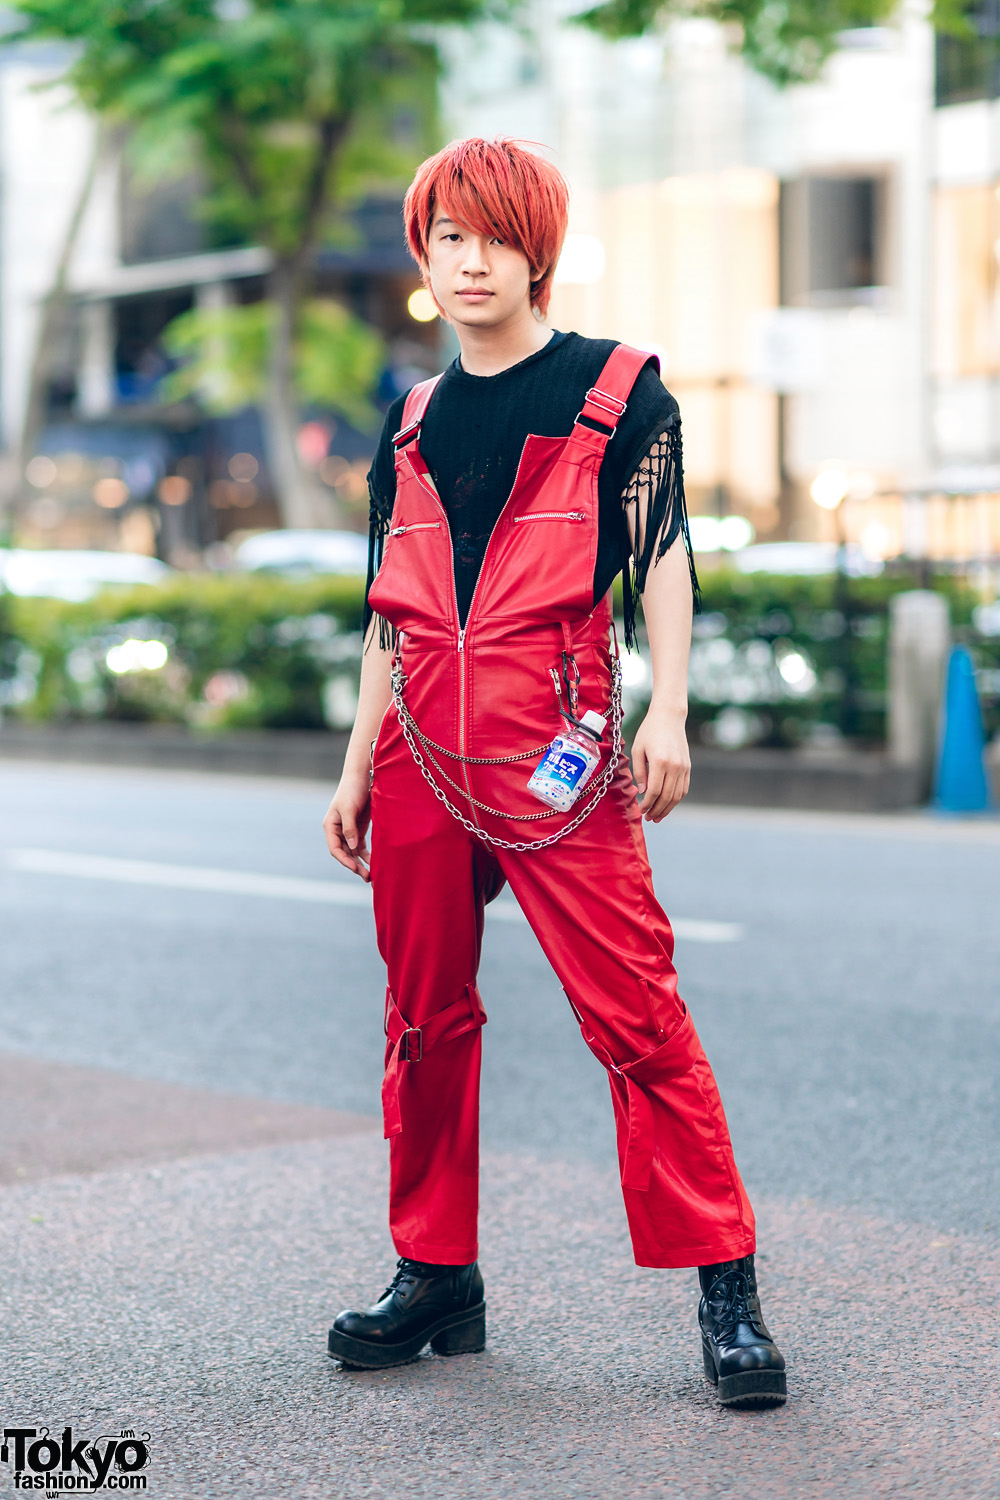 Red & Black Japanese Streetwear Style w/ Red Hair, Fringe Shirt, Kobinai Faux Leather Overalls, Silver Chains & Lace-Up Boots